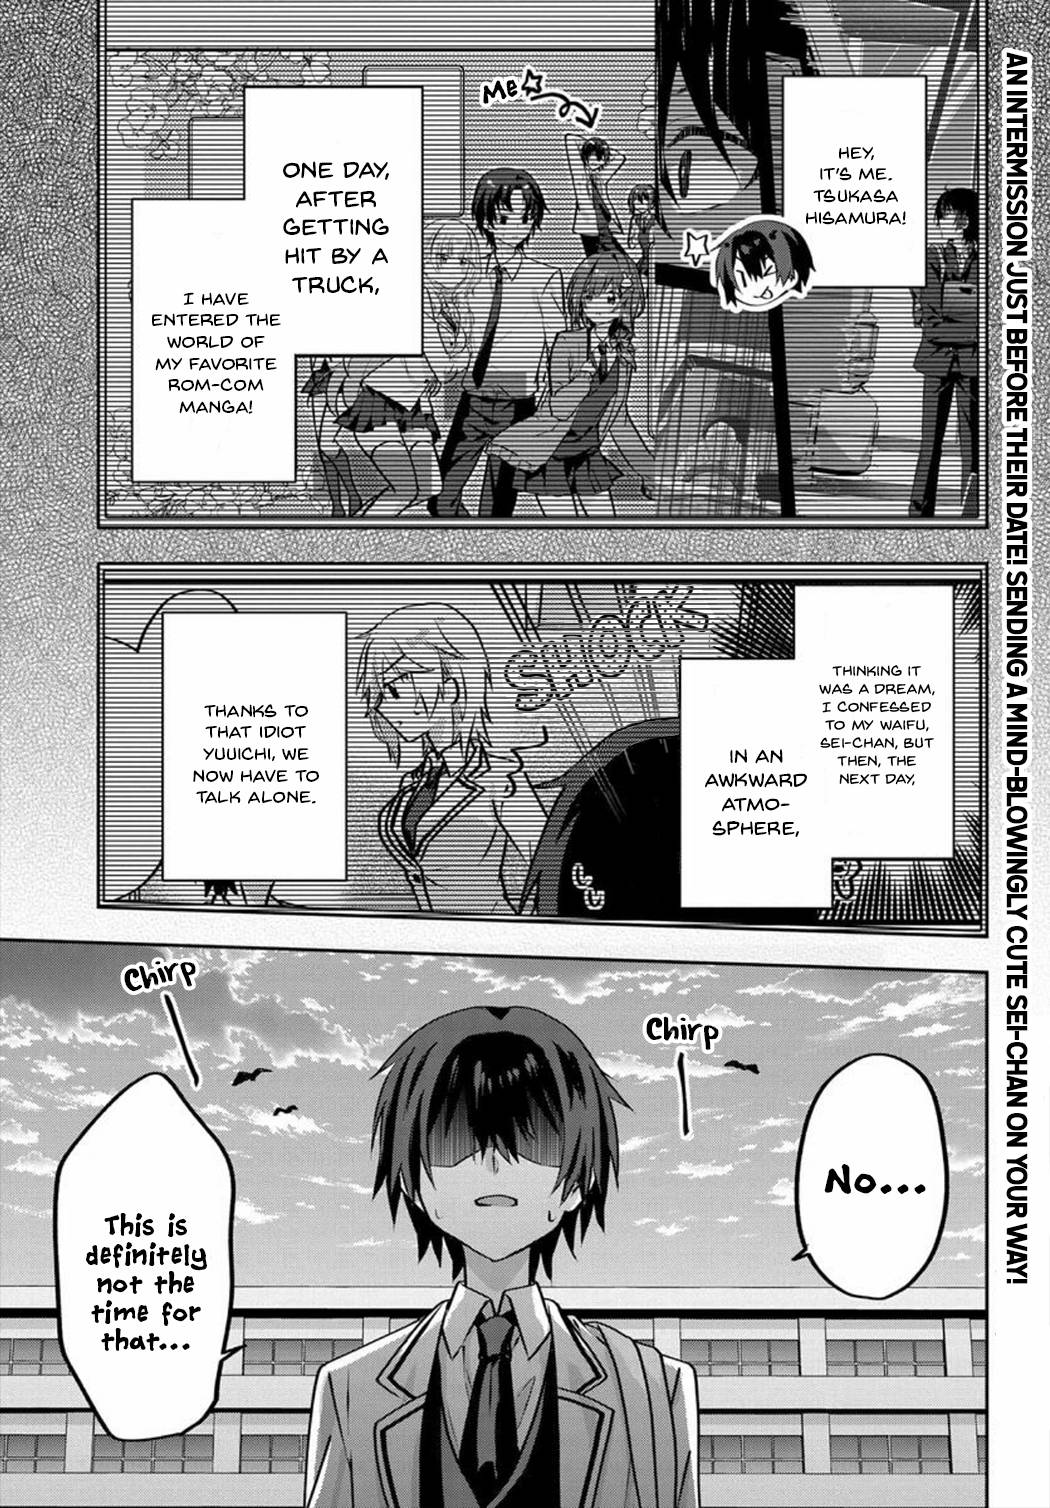 Since I’ve Entered the World of Romantic Comedy Manga, I’ll Do My Best to Make the Losing Heroine Happy. - chapter 3.5 - #1